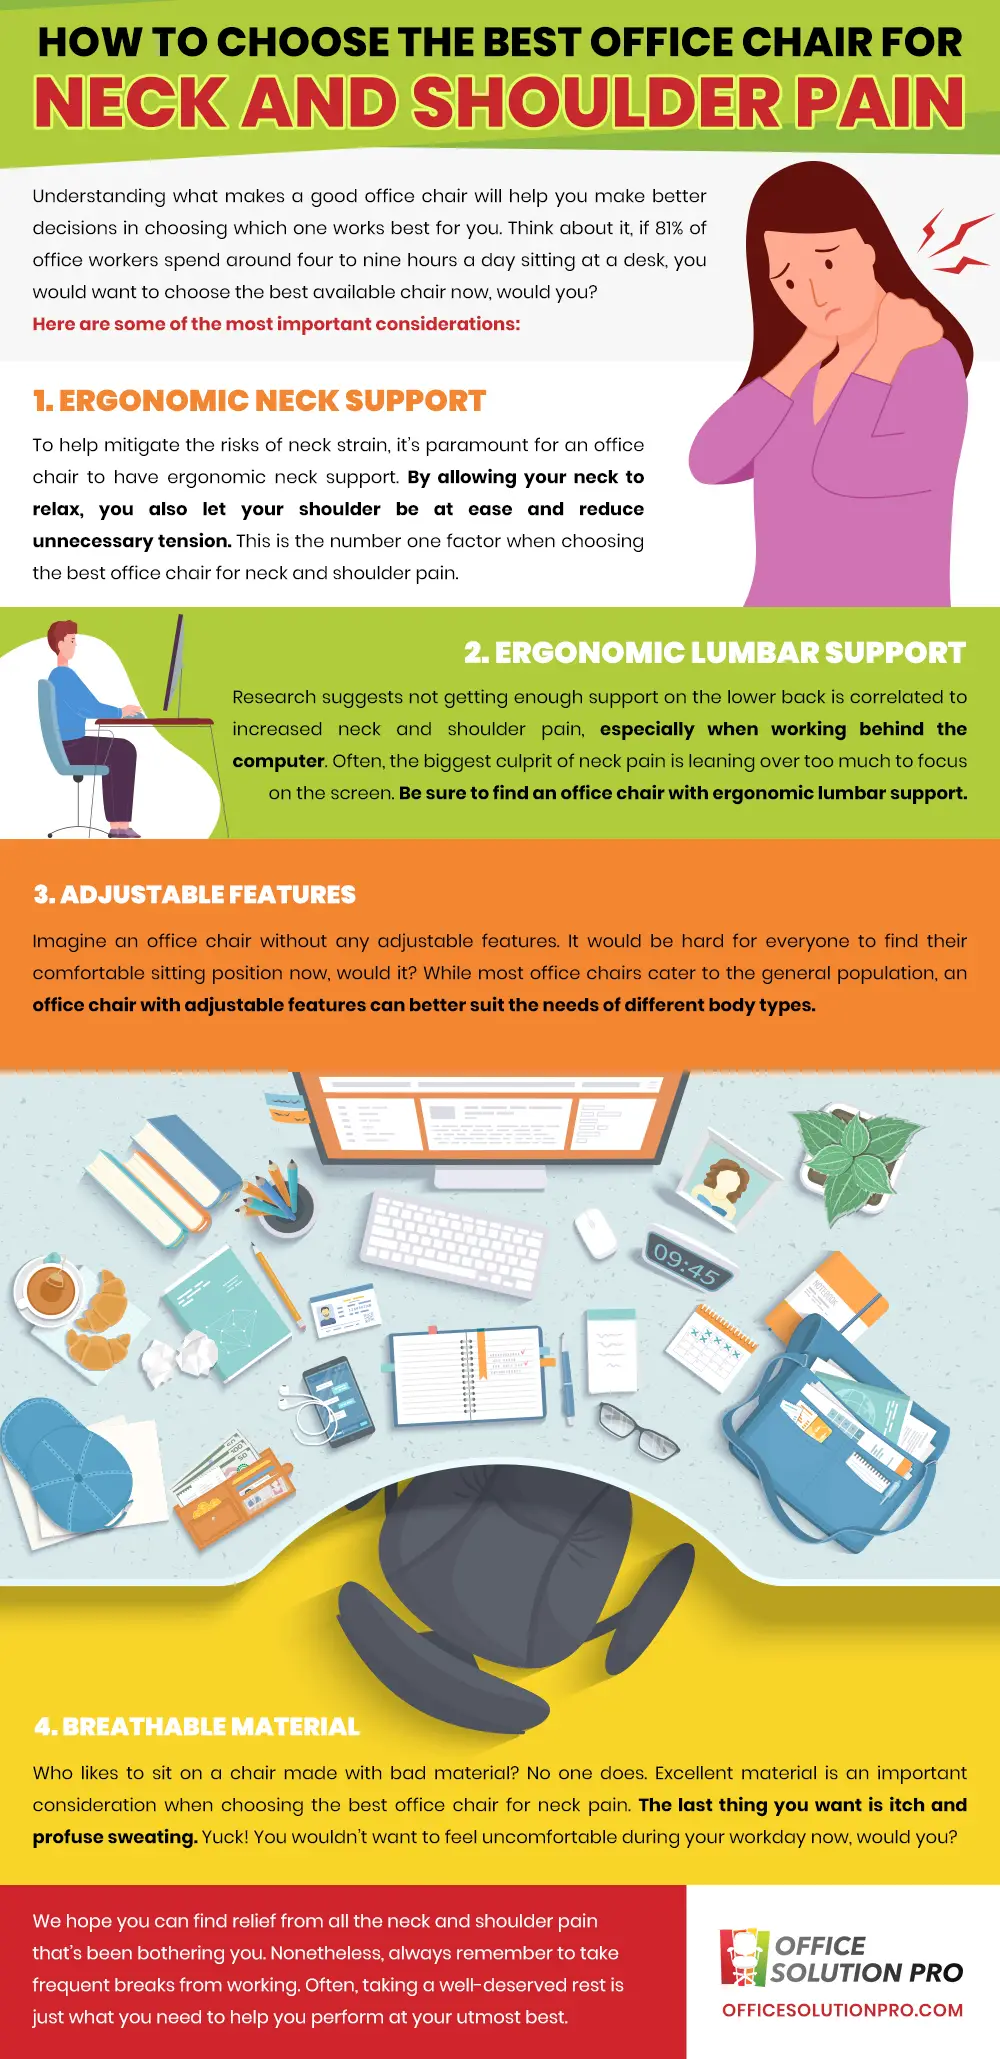 How to Choose an Office Chair for Back and Shoulder Pain - Infographic